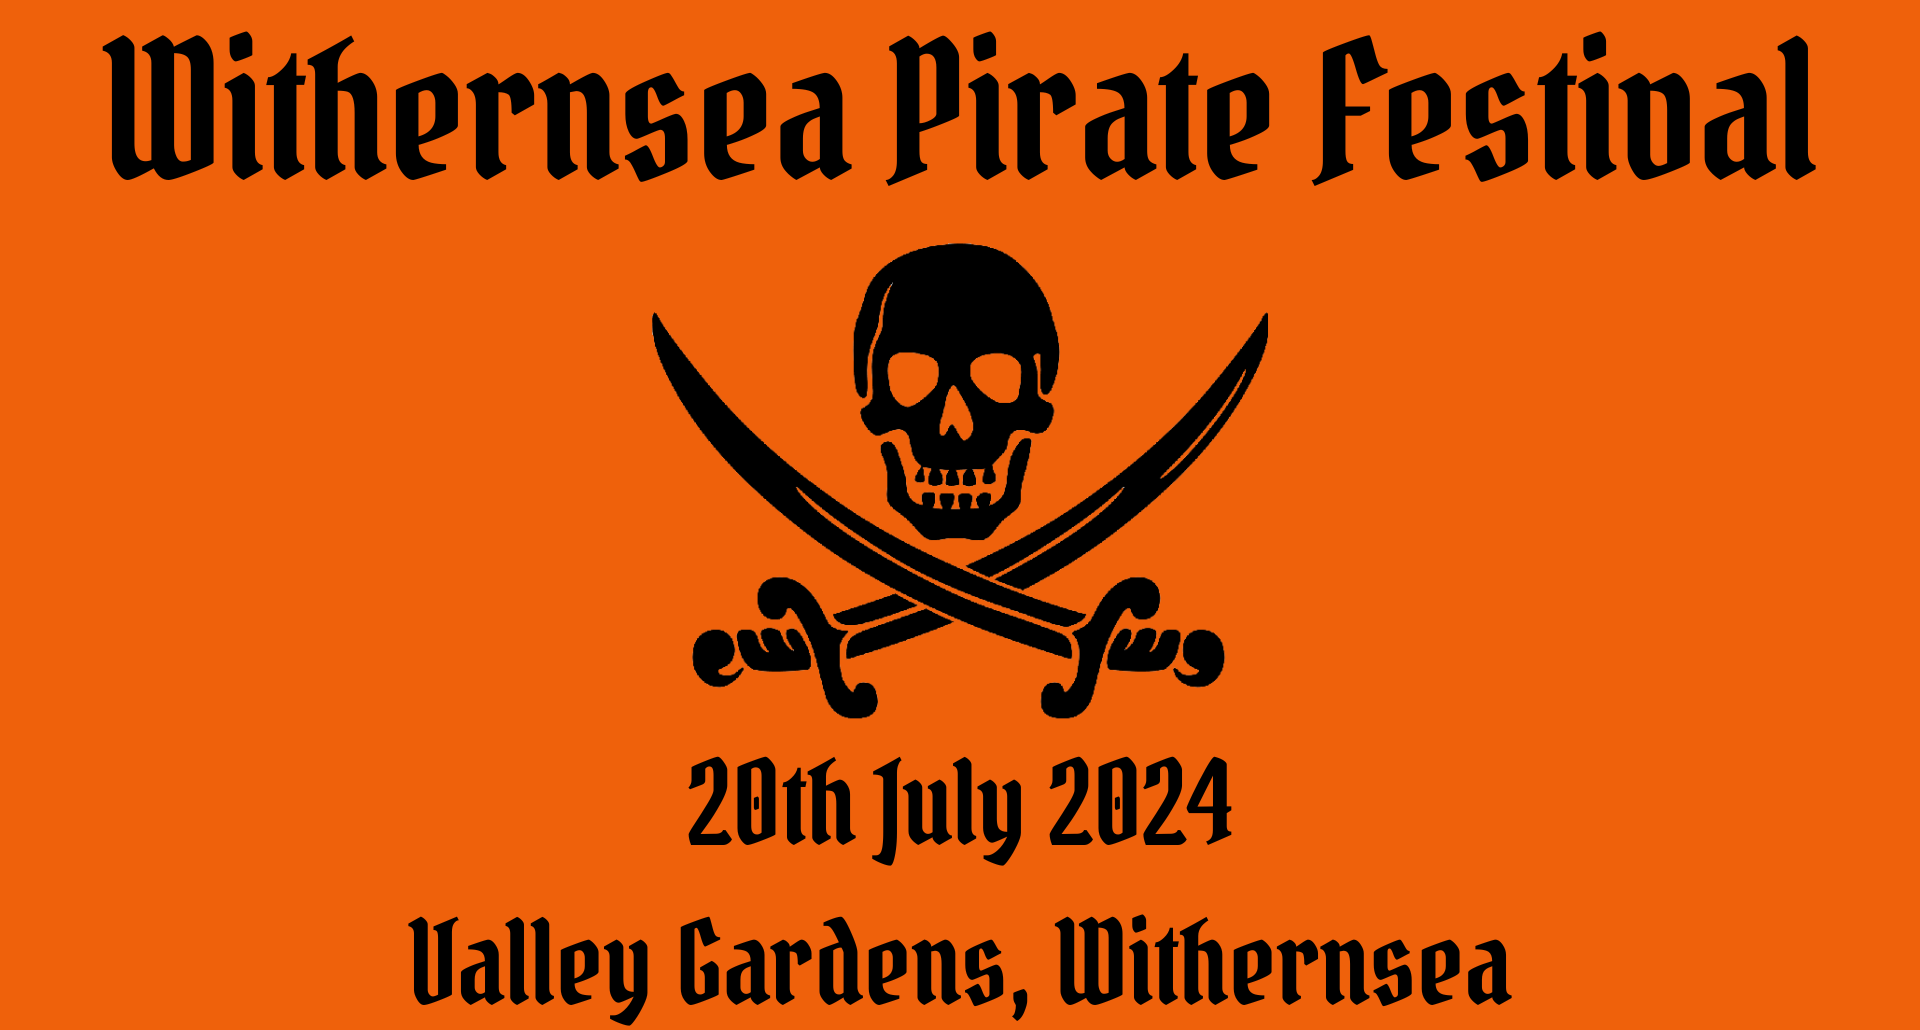 Withernsea Pirate Festival